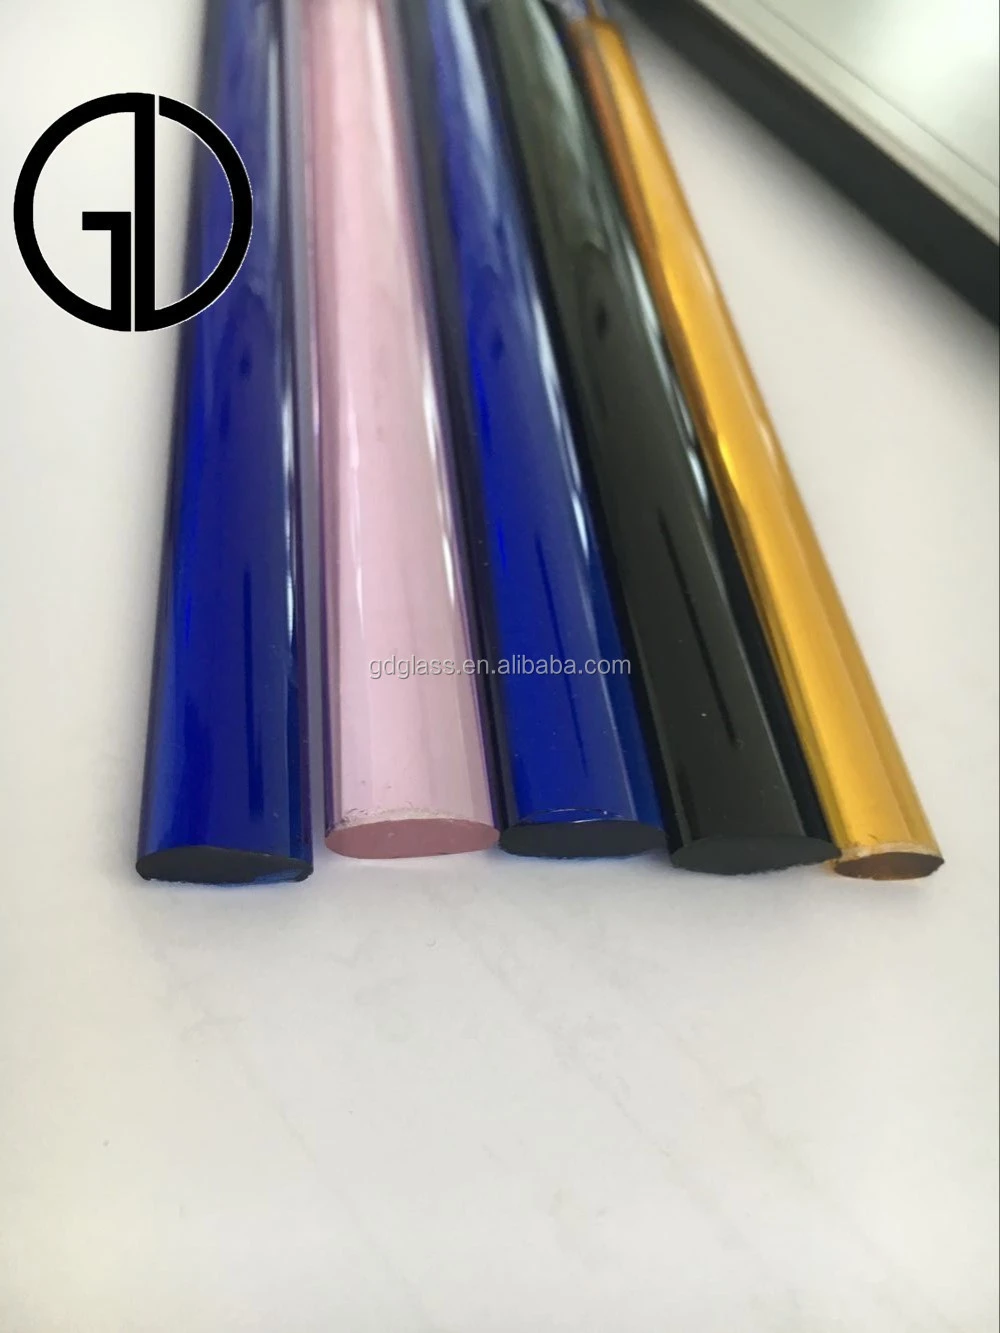 boro 3.3 cheap glass color rods for glass blowing